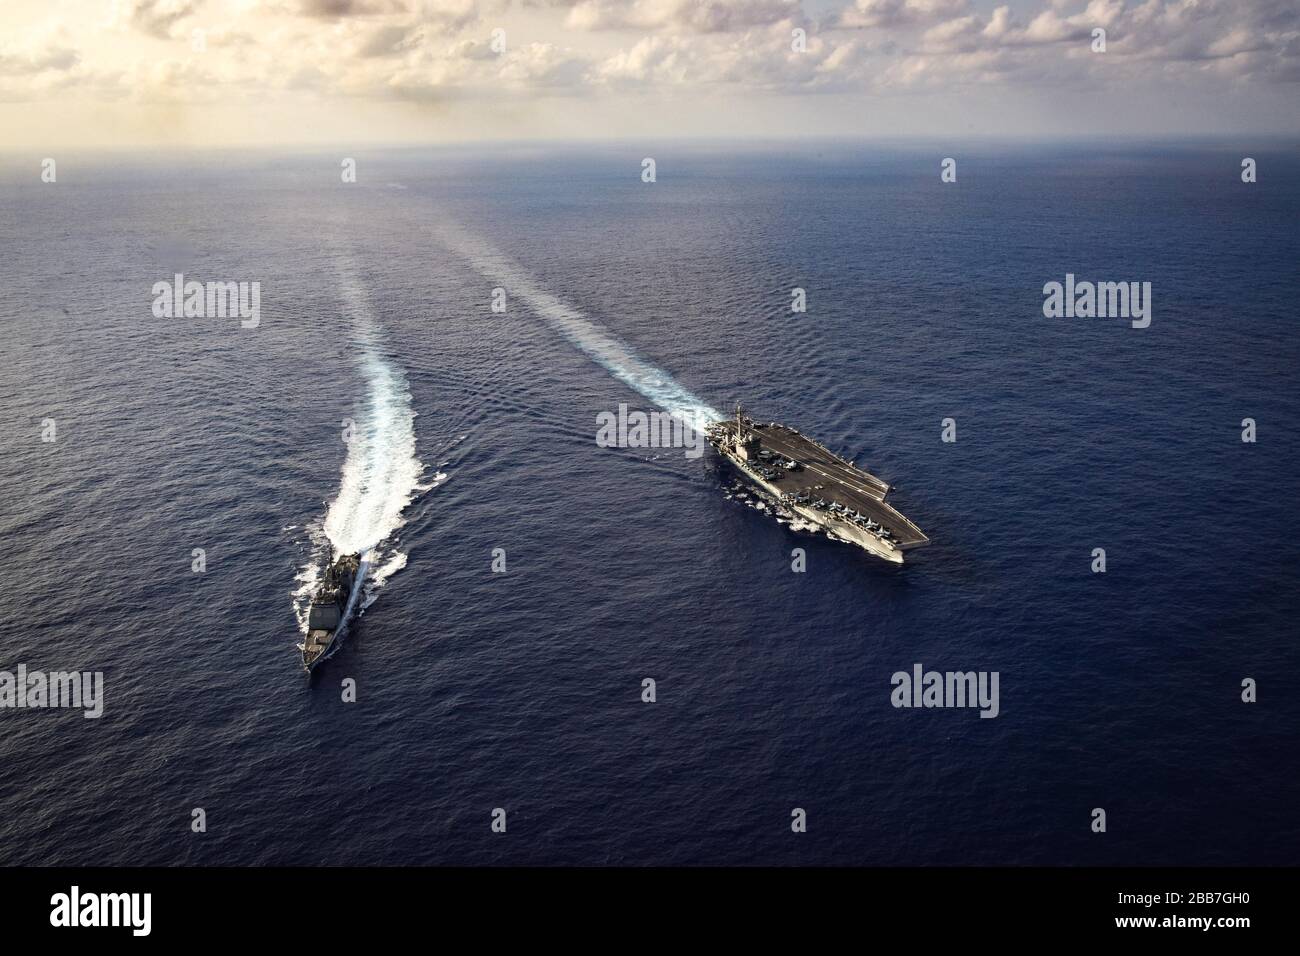 The U.S. Navy Nimitz-class aircraft carrier USS Theodore Roosevelt in formation with the Arleigh Burke-class guided-missile destroyer USS Bunker Hill as they perform a routine transit March 18, 2020 in the Philippine Sea. Stock Photo